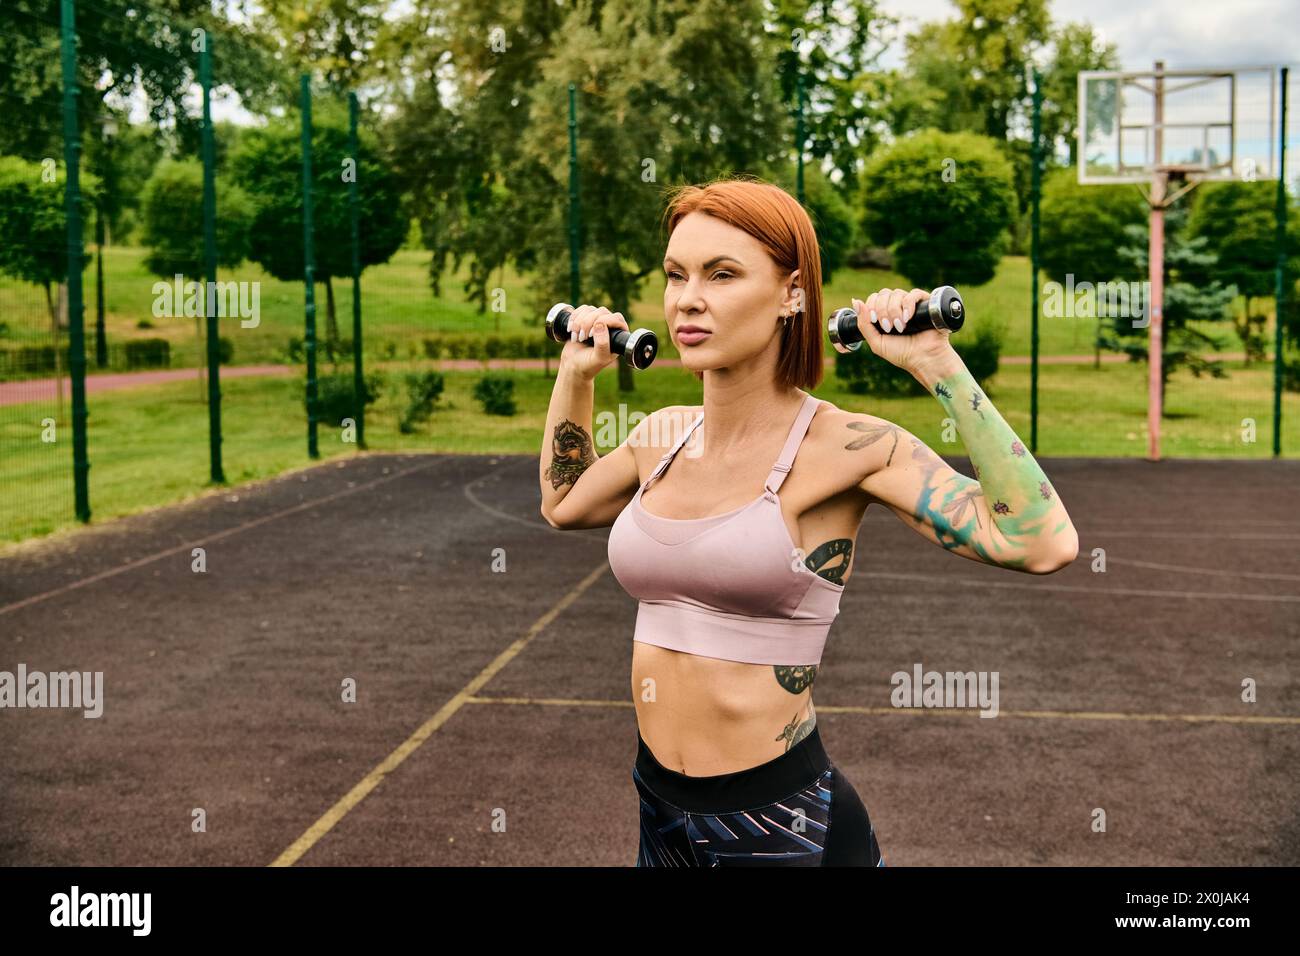 A woman in sportswear, holds a pair of dumbbells with determination and focus during outdoor exercise. Stock Photo